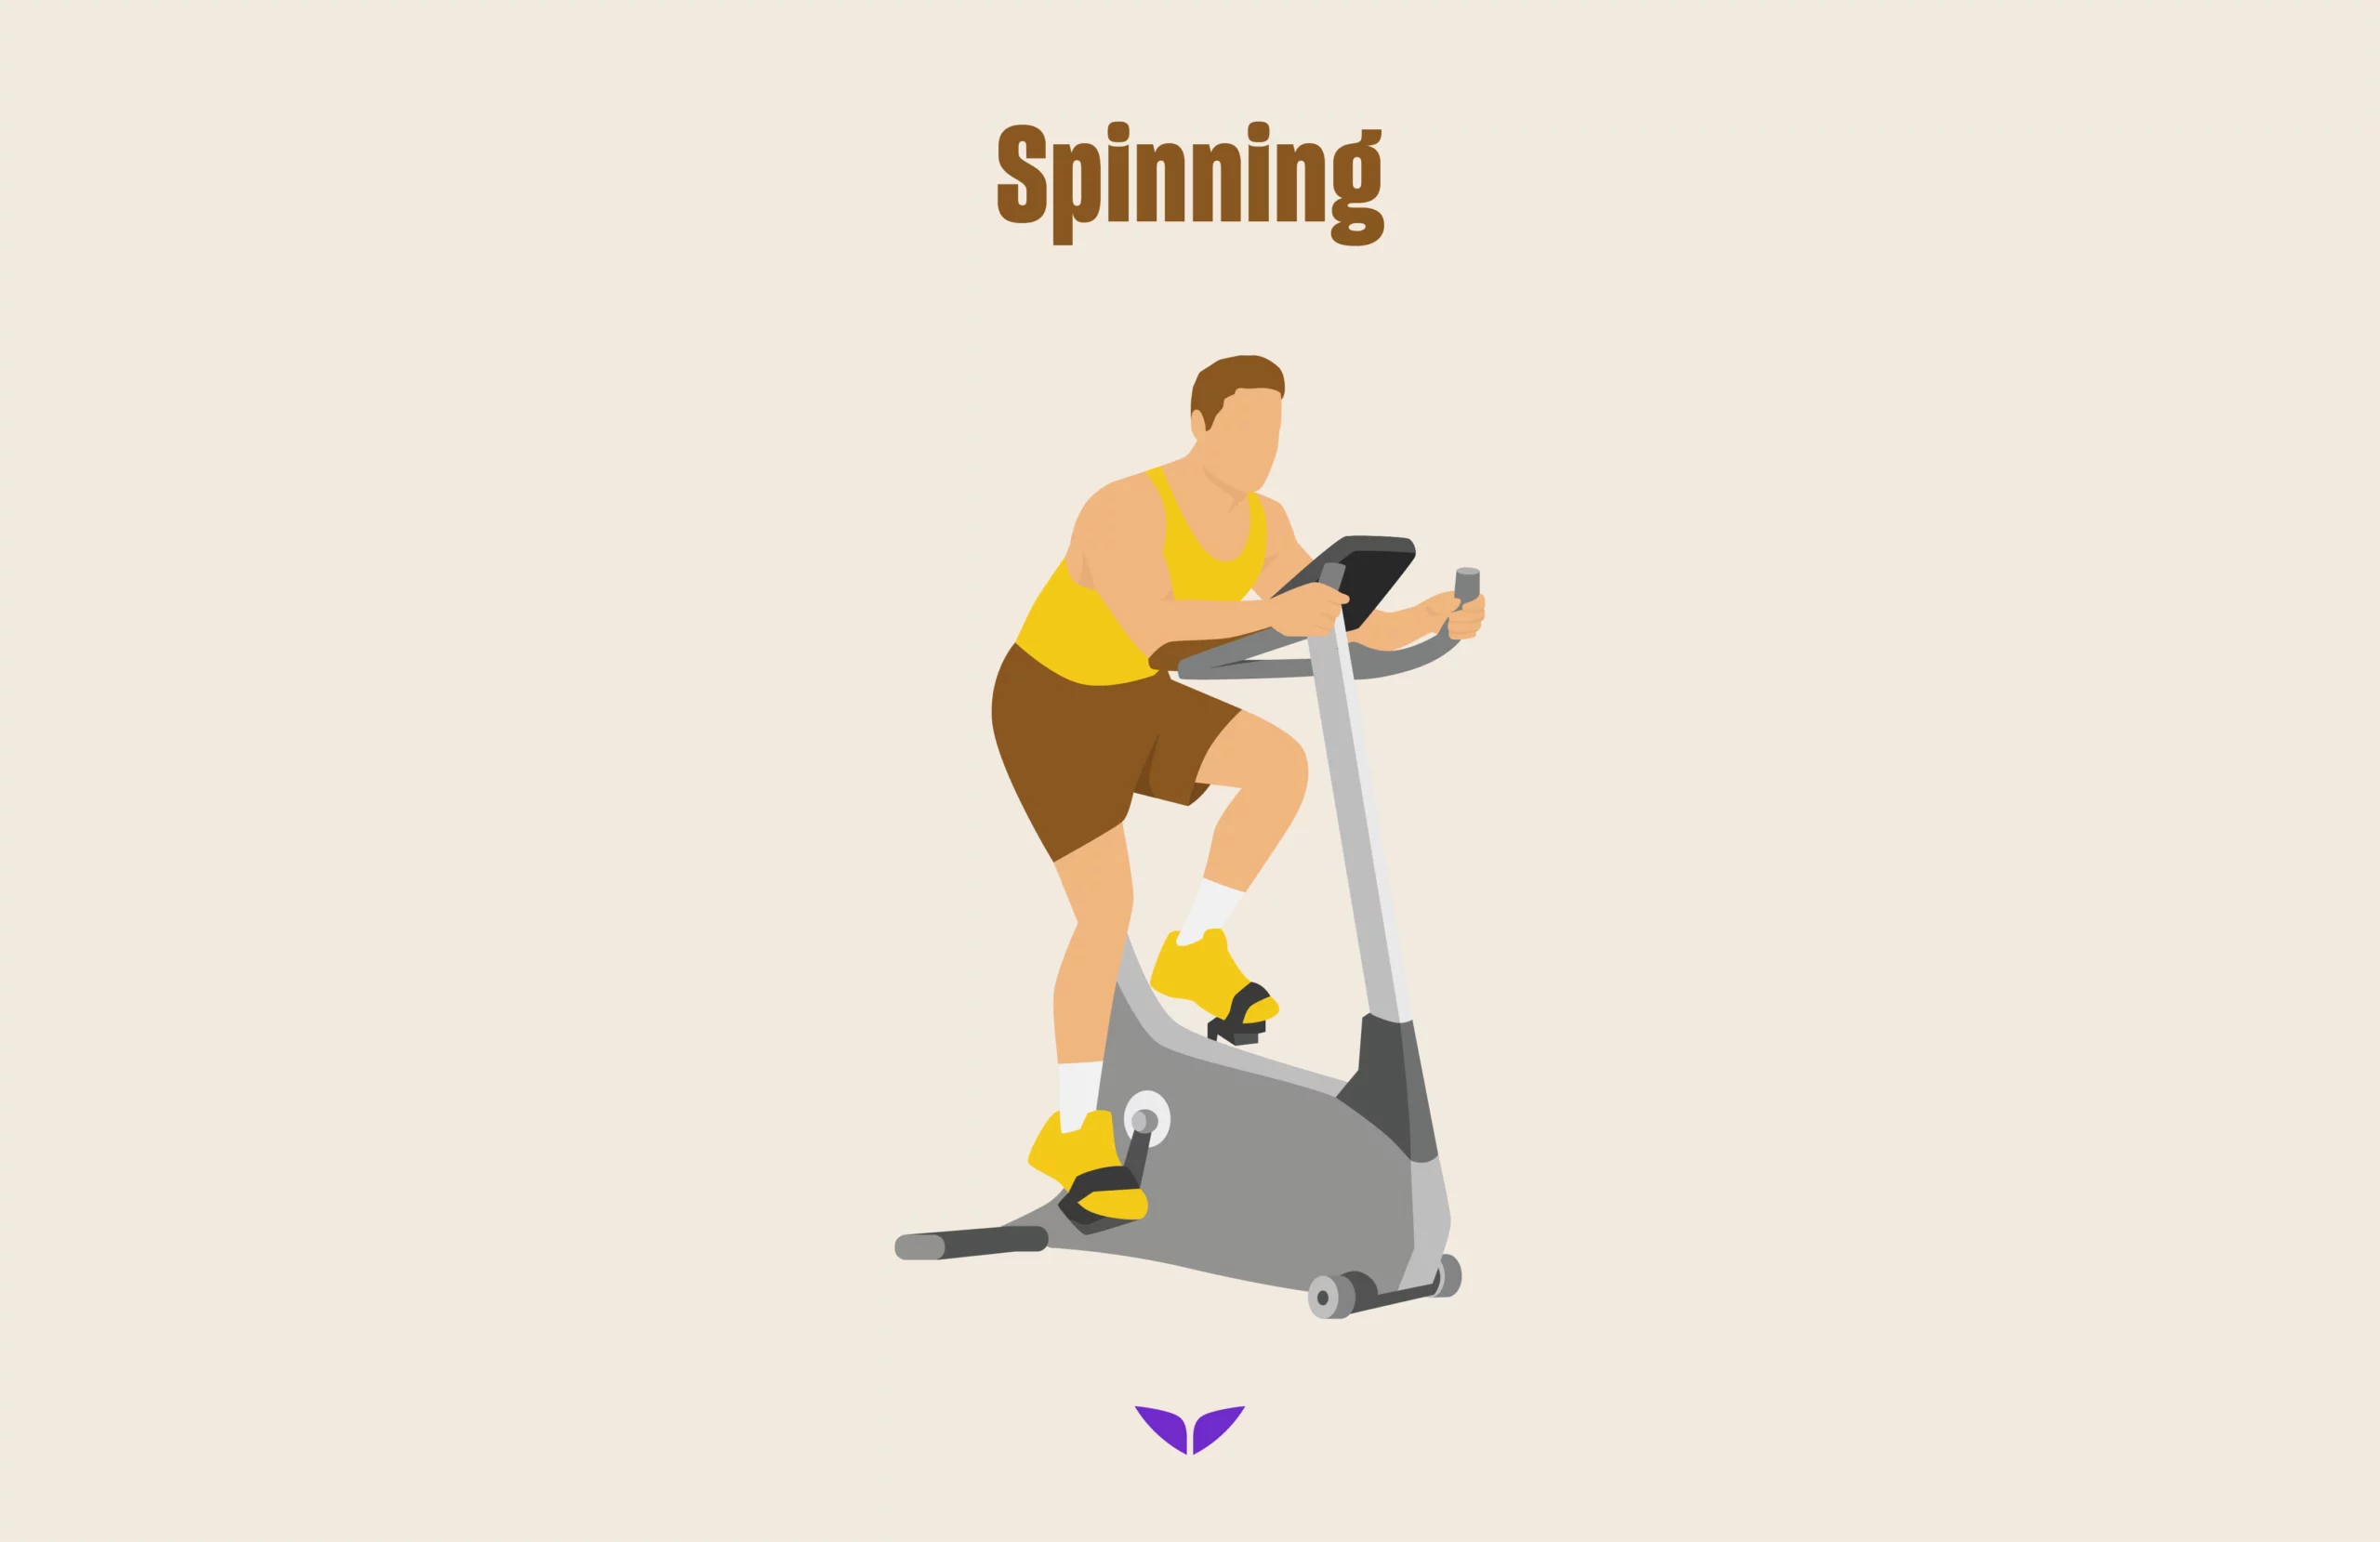 Spinning as one of the top cardio workouts